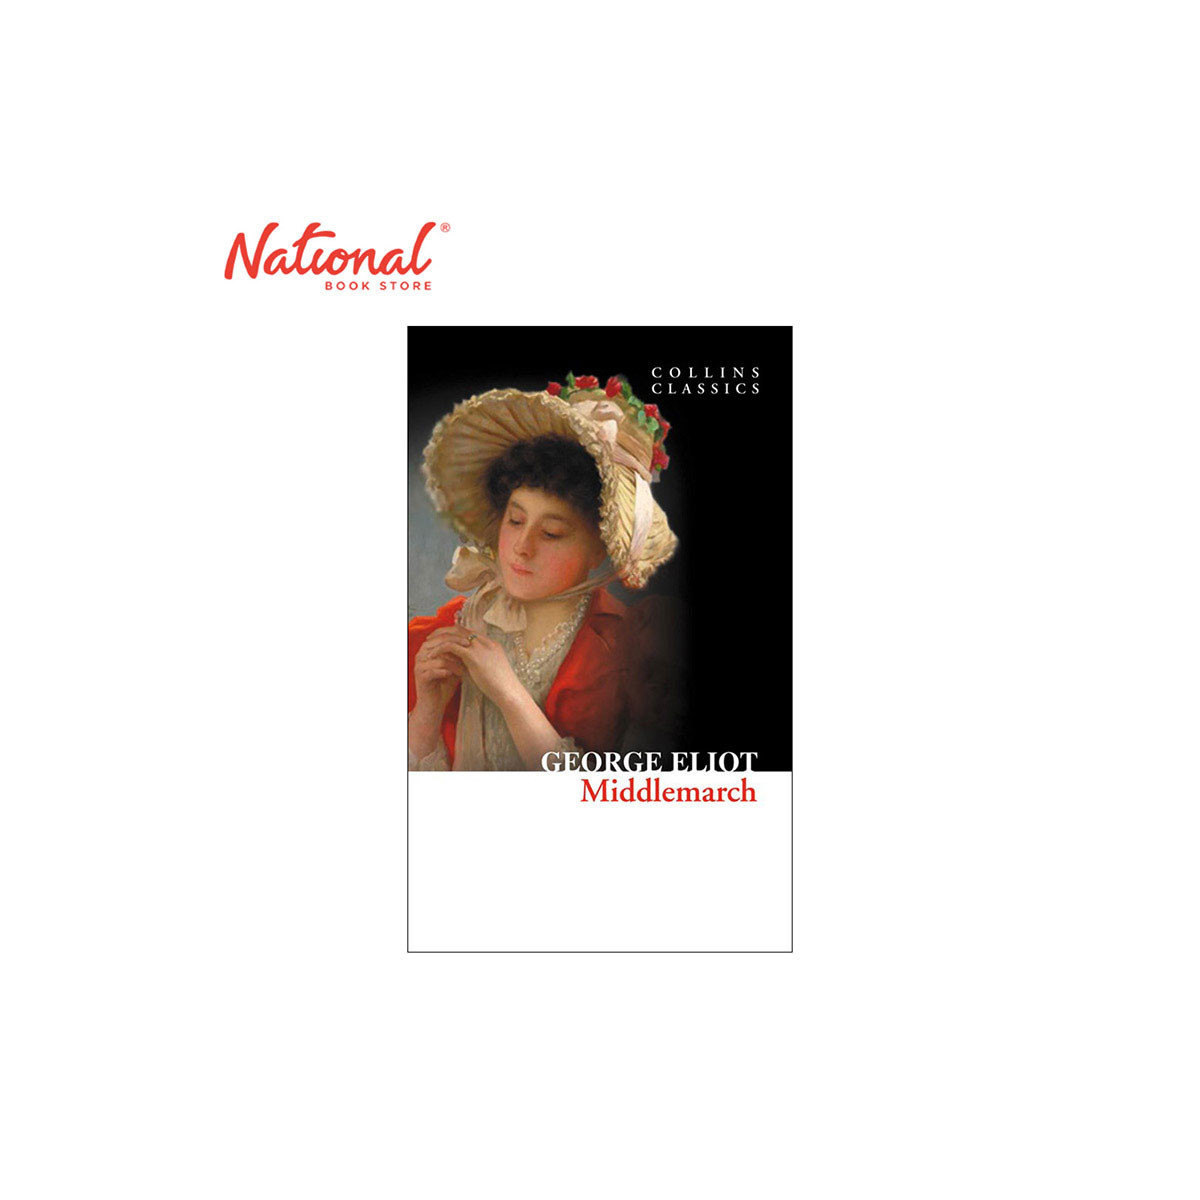 Middlemarch by George Eliot - Mass Market - Classics - Fiction & Literature